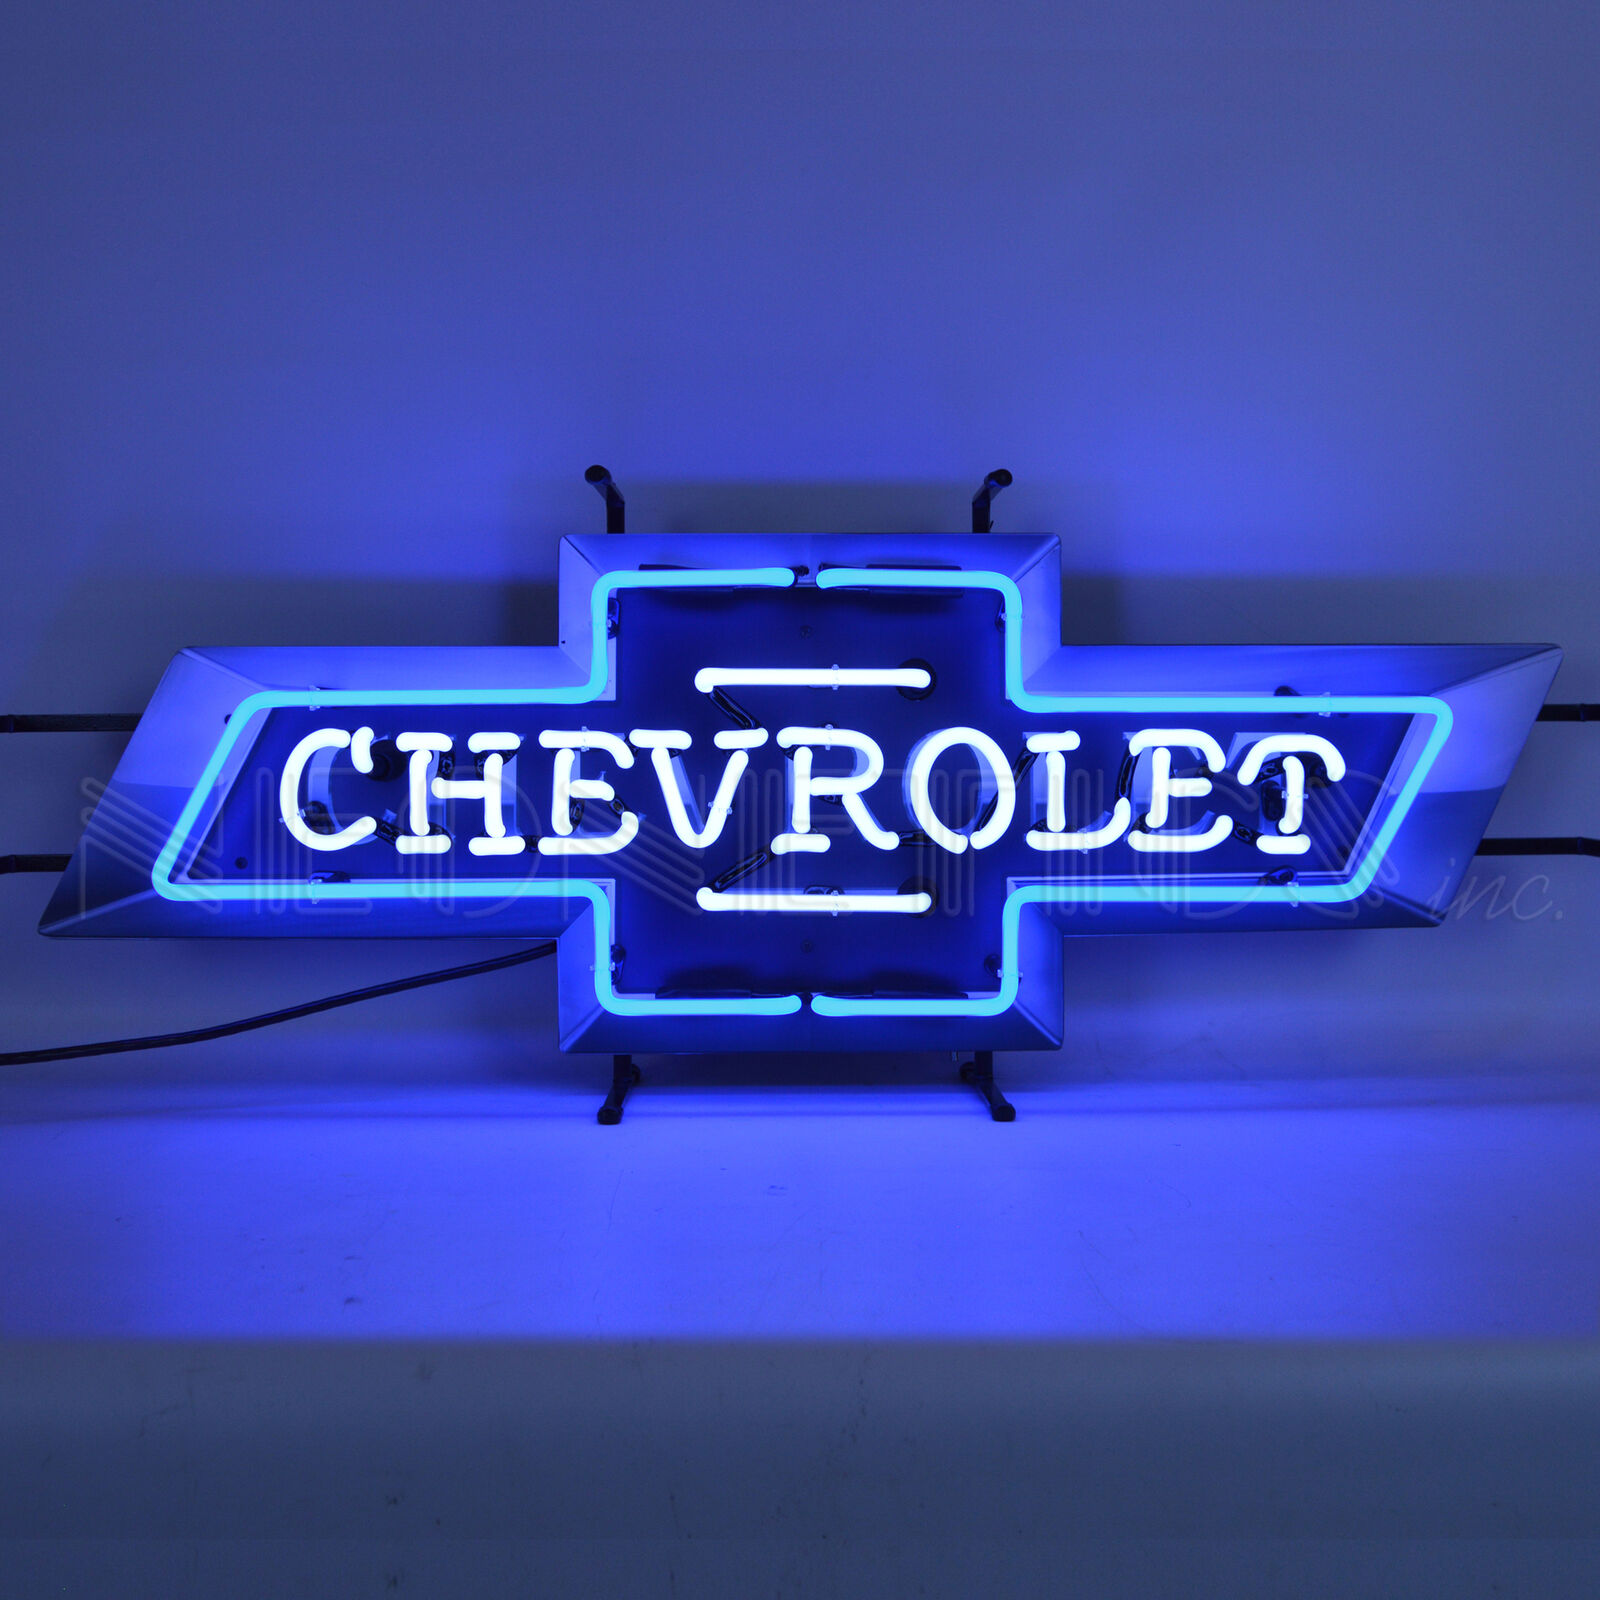 Man Cave Lamp CHEVROLET BOWTIE NEON SIGN WITH BACKING